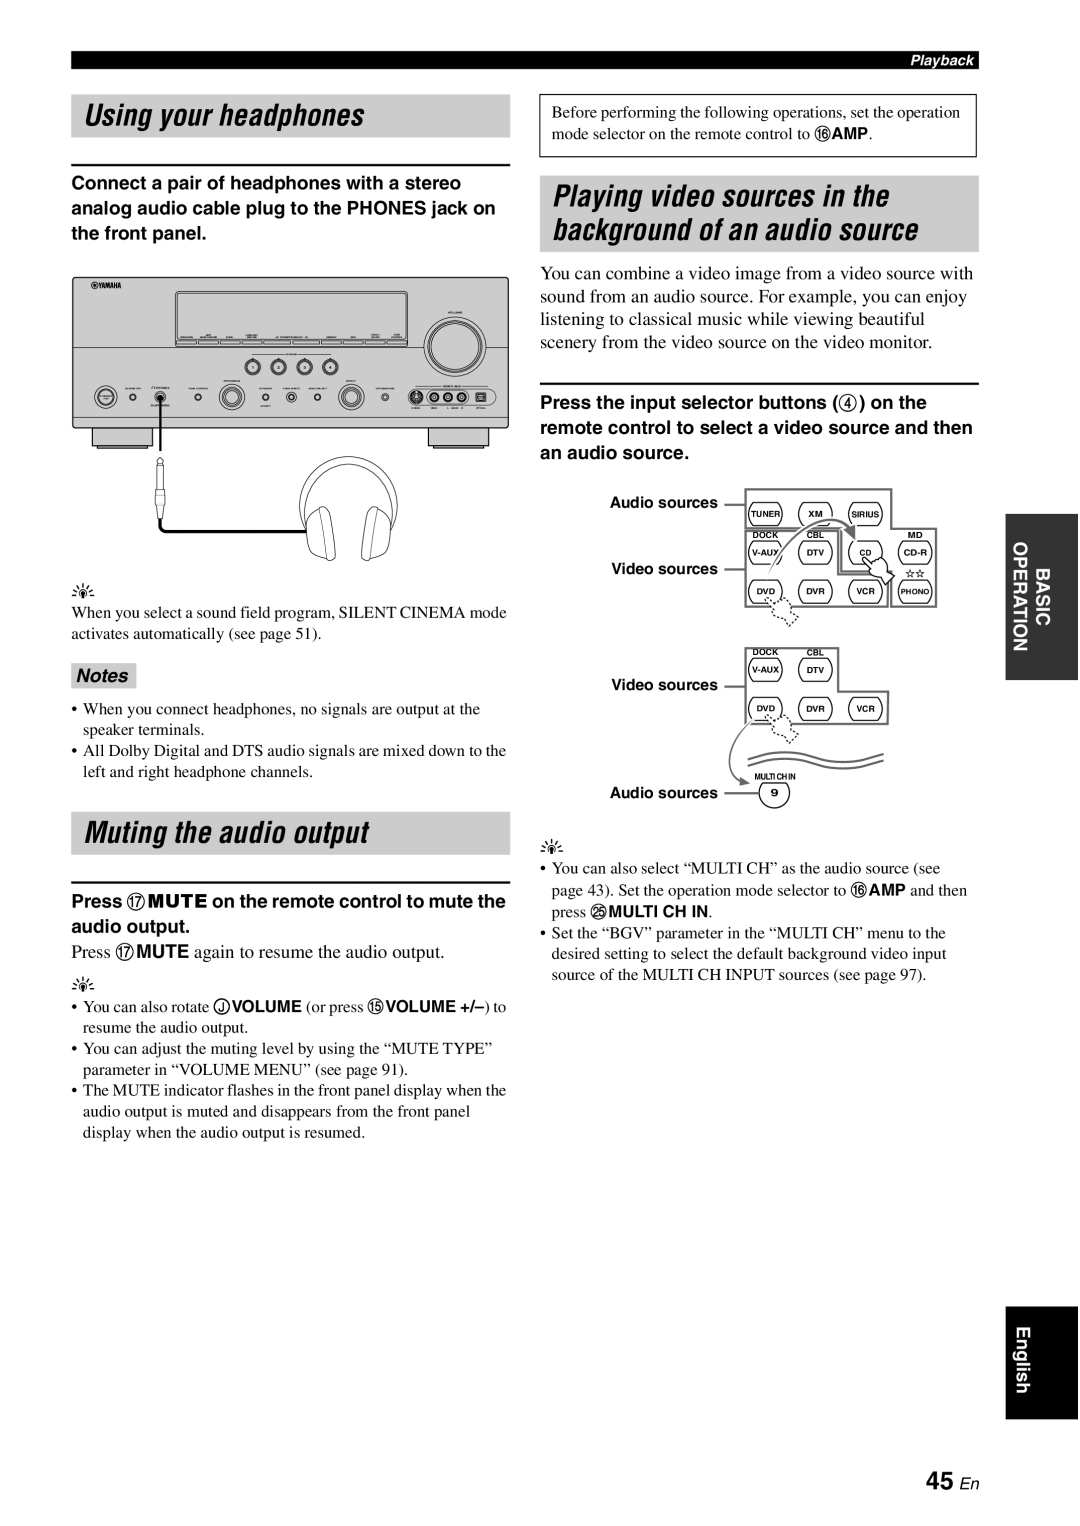 Yamaha HTR-6180 owner manual Using your headphones, Muting the audio output, 45 En, Notes 